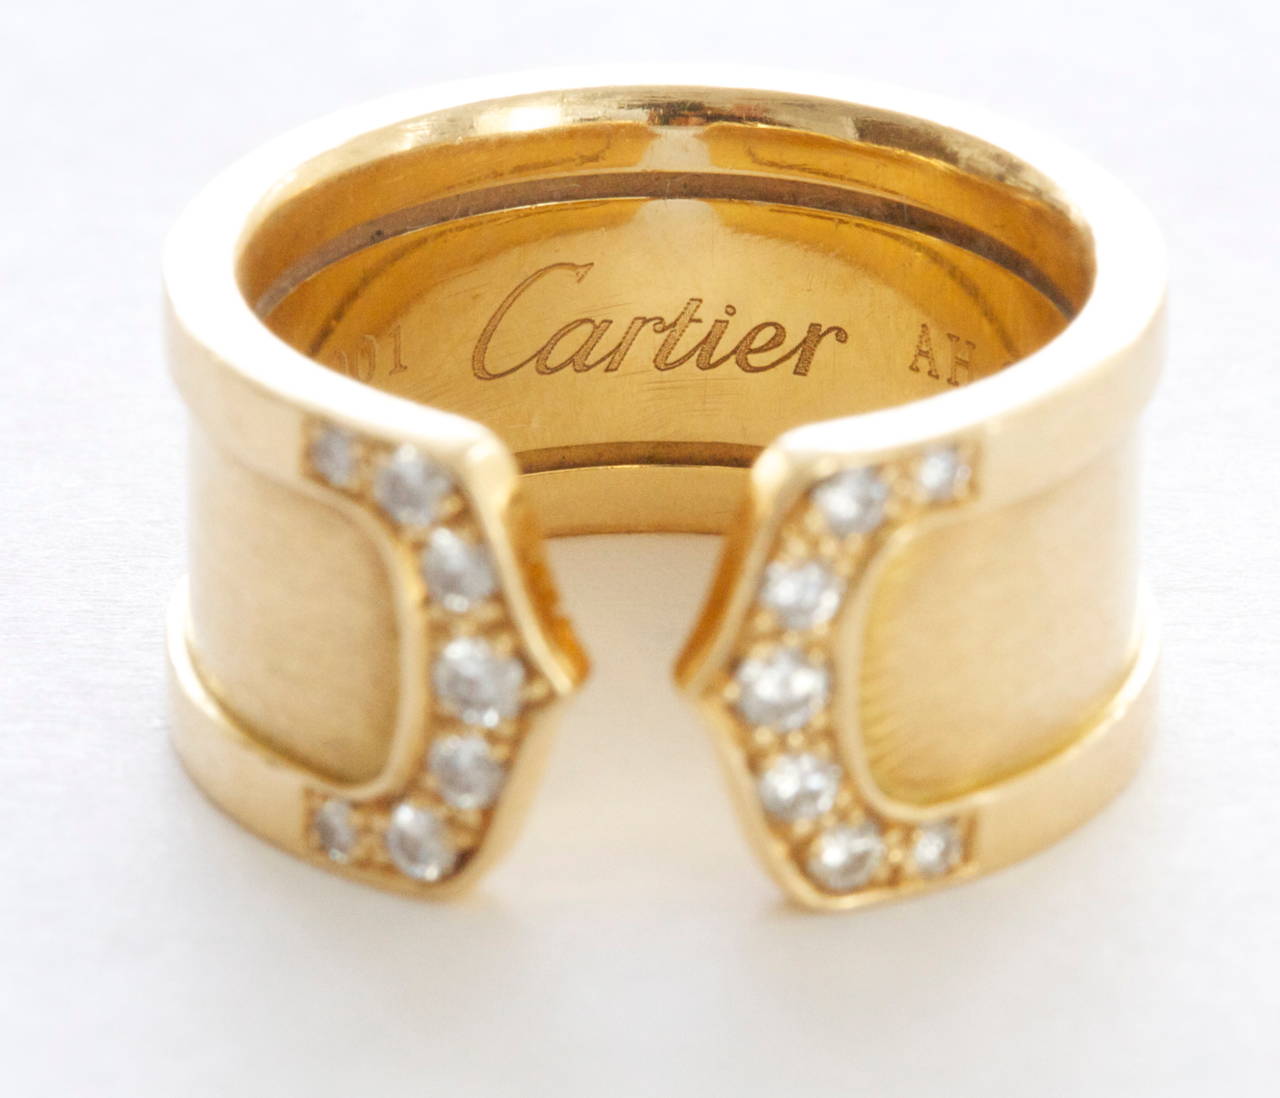 double c cartier ring price